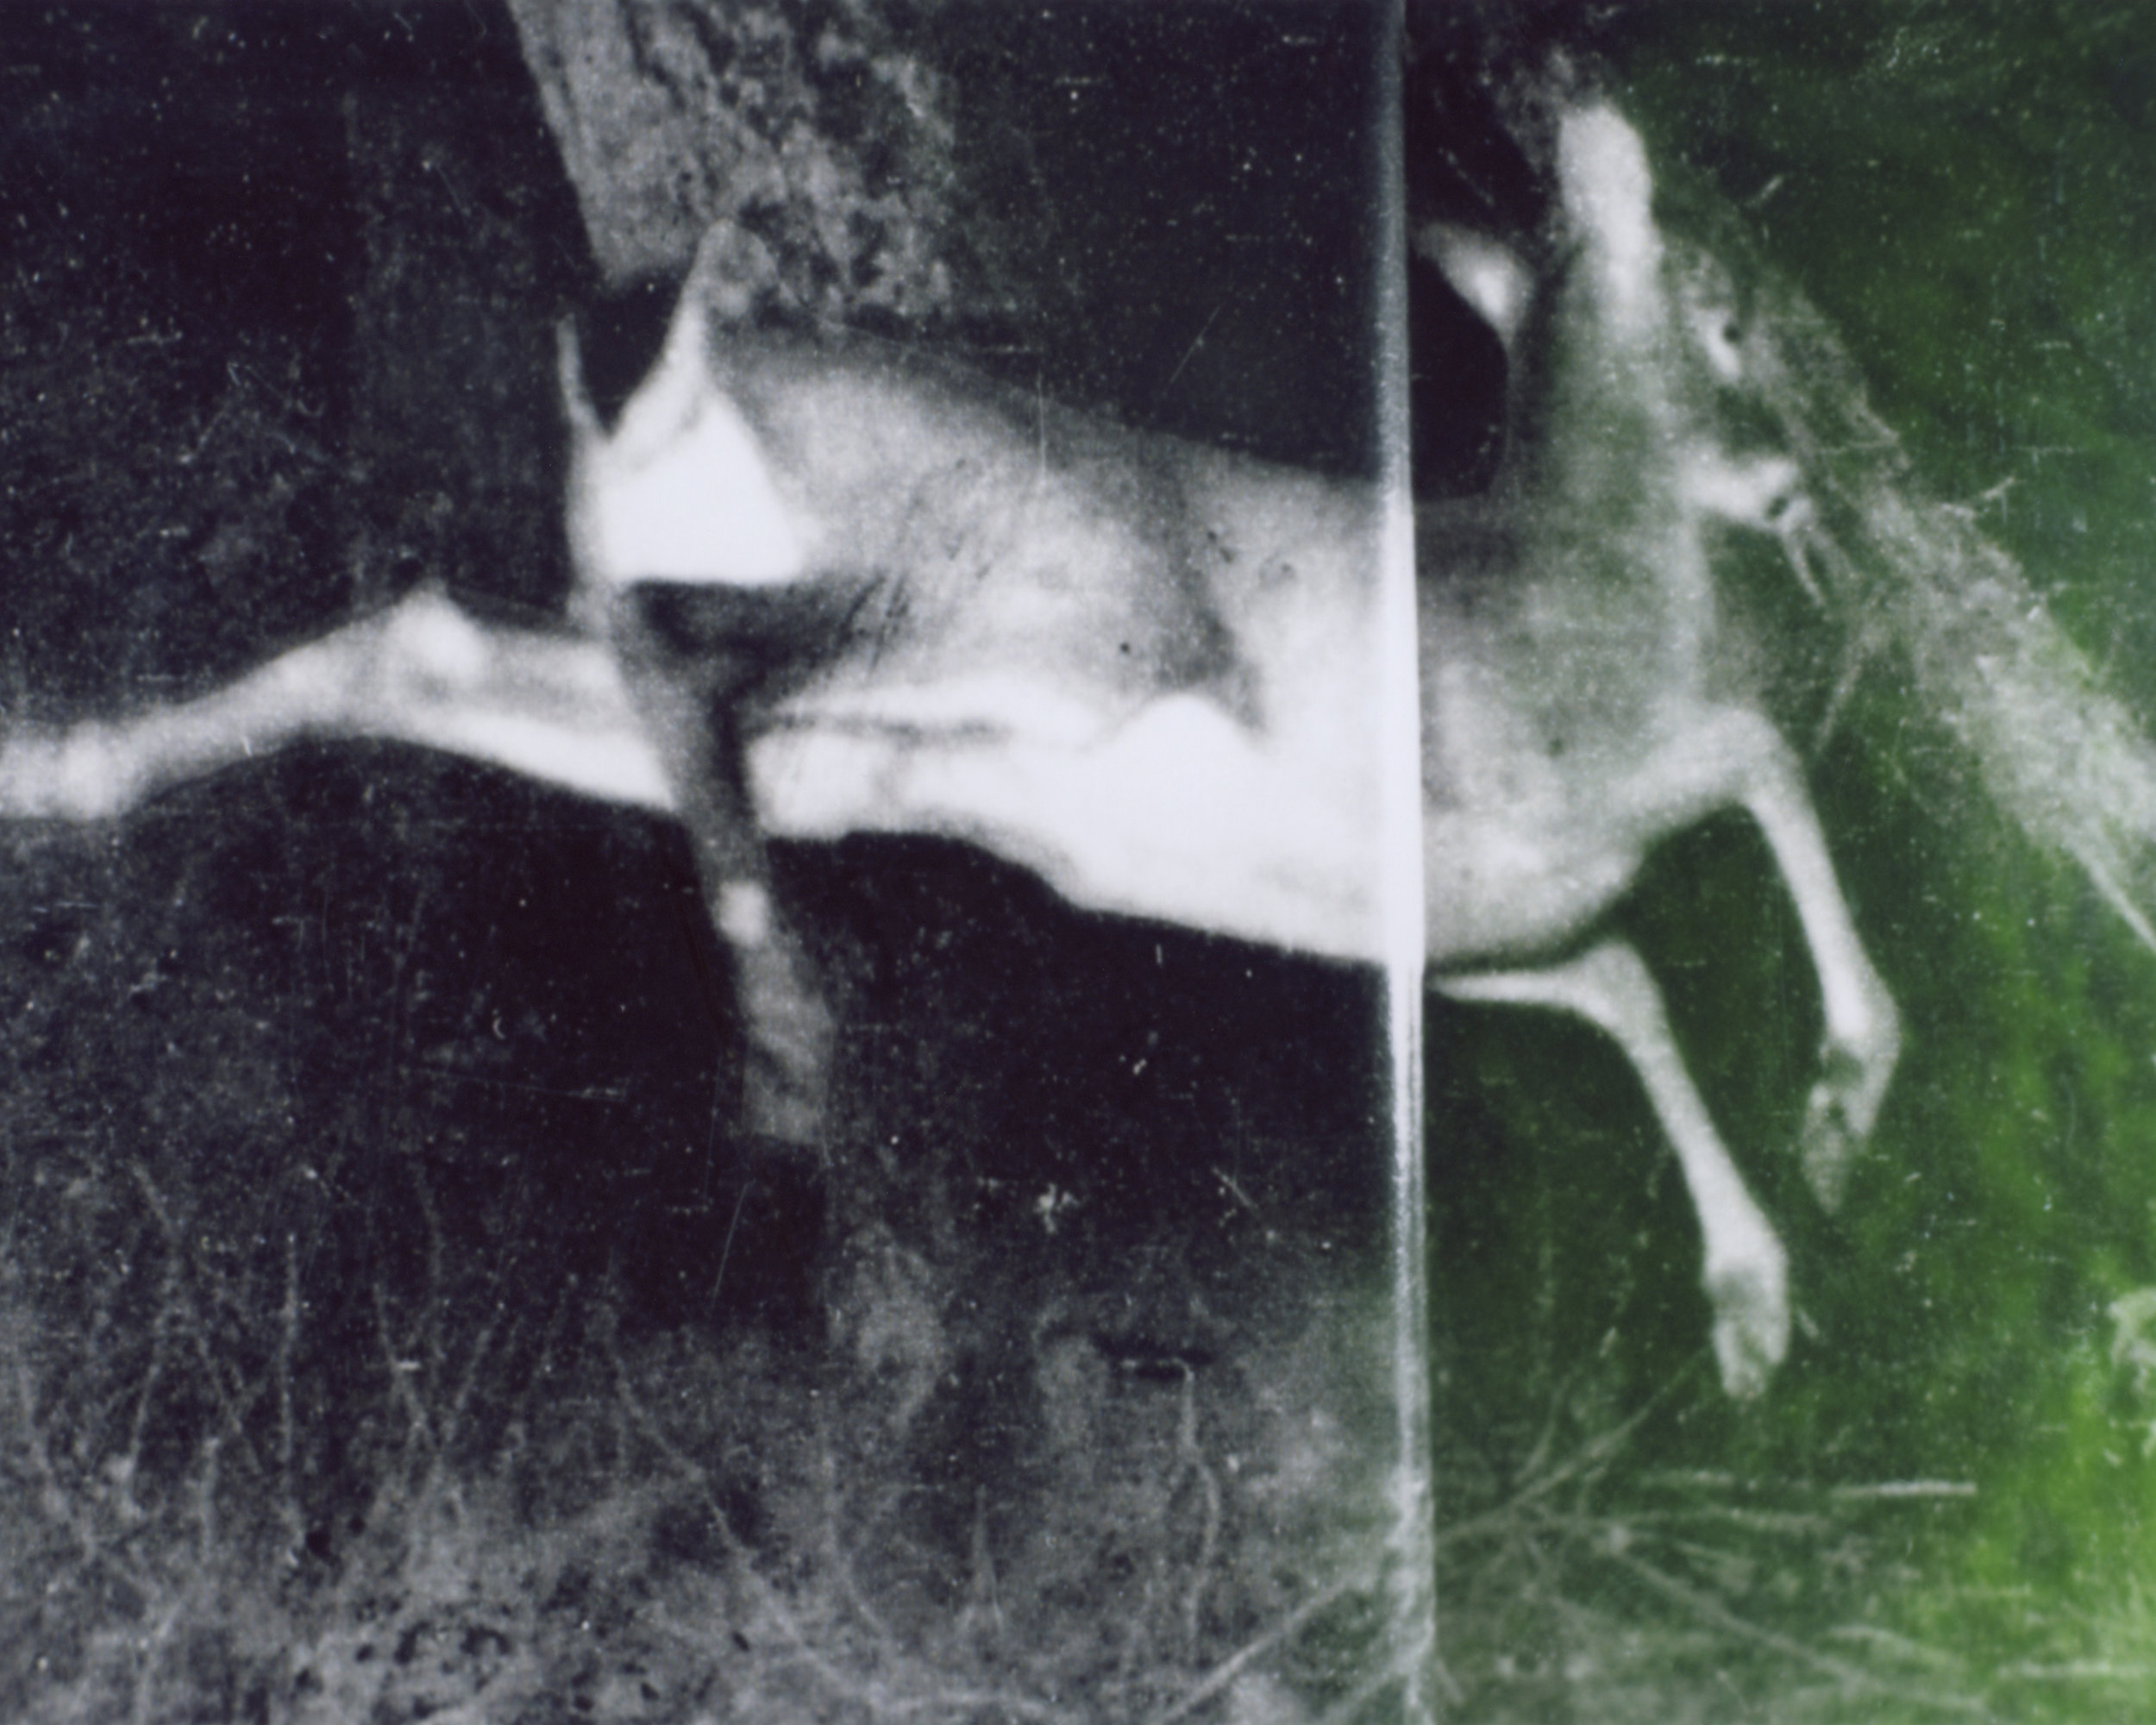   A wounded deer leaps the highest. (After Dickinson)  Photographic print of Polaroid negative, 2017, 15”x12” edition of 3   Statement + Info  